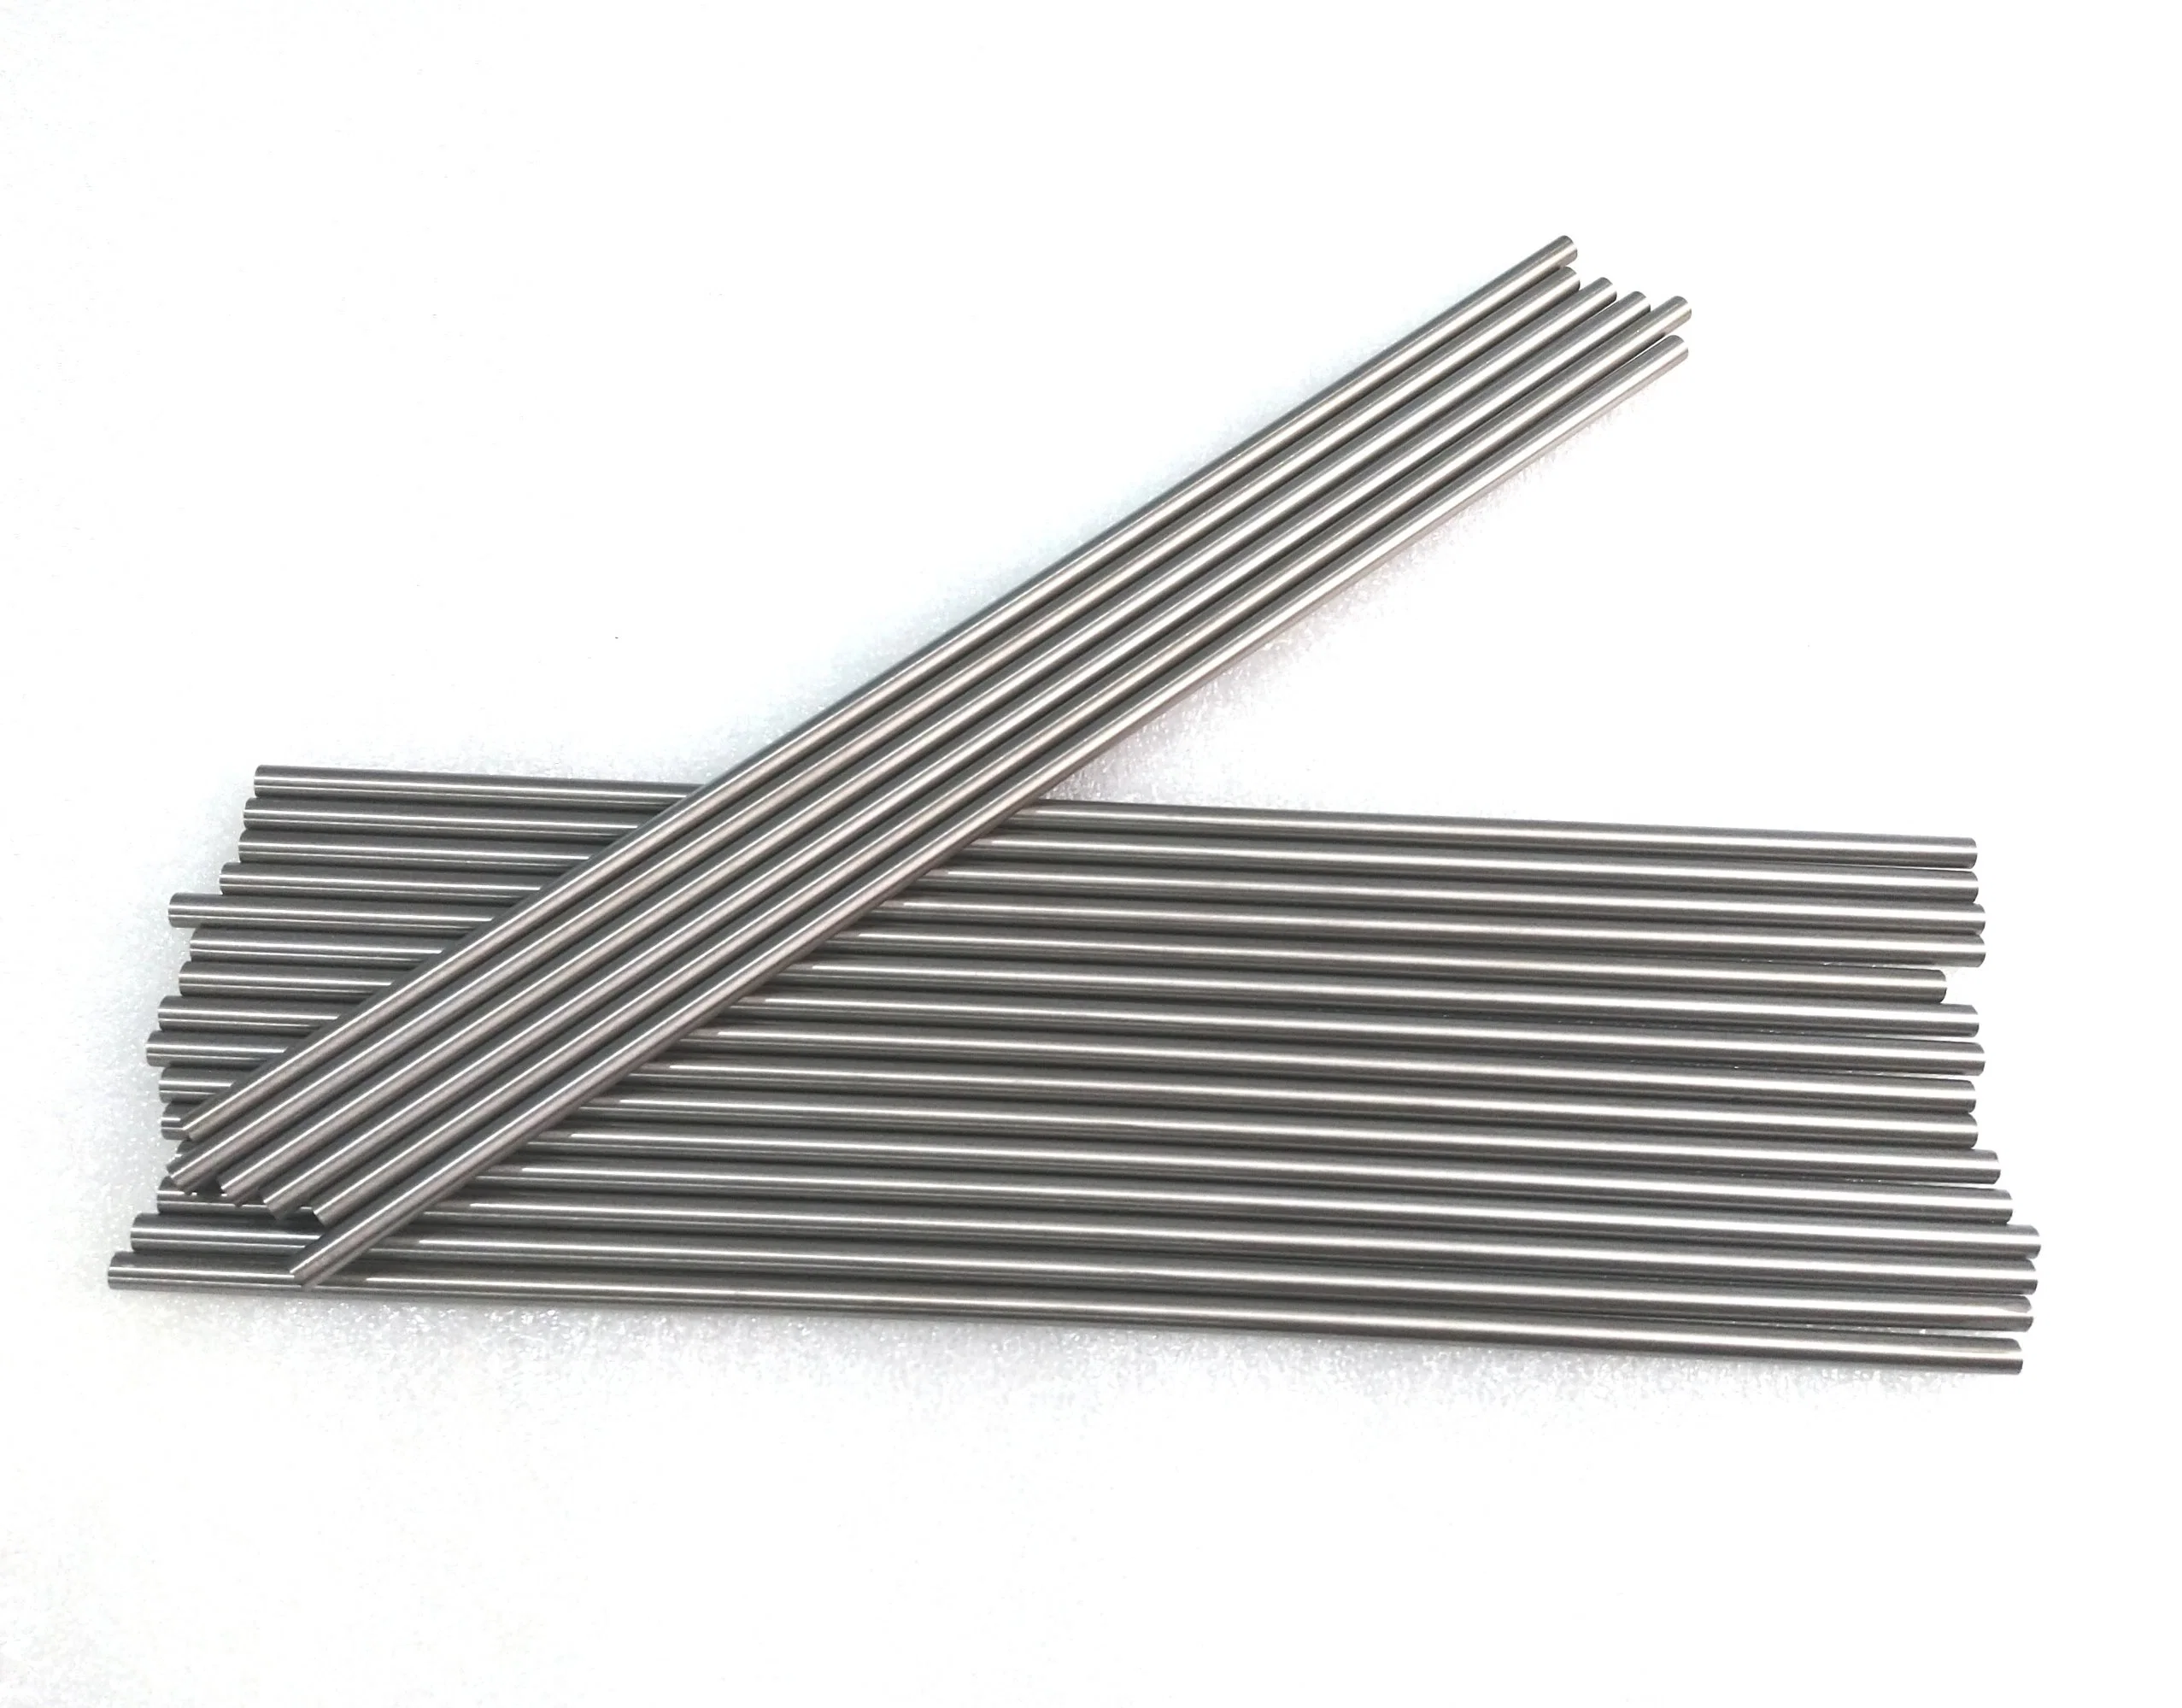 OEM Customized Size Tungsten Carbide Cemented Carbide Polished Grinding Round Bar Rod for Drill